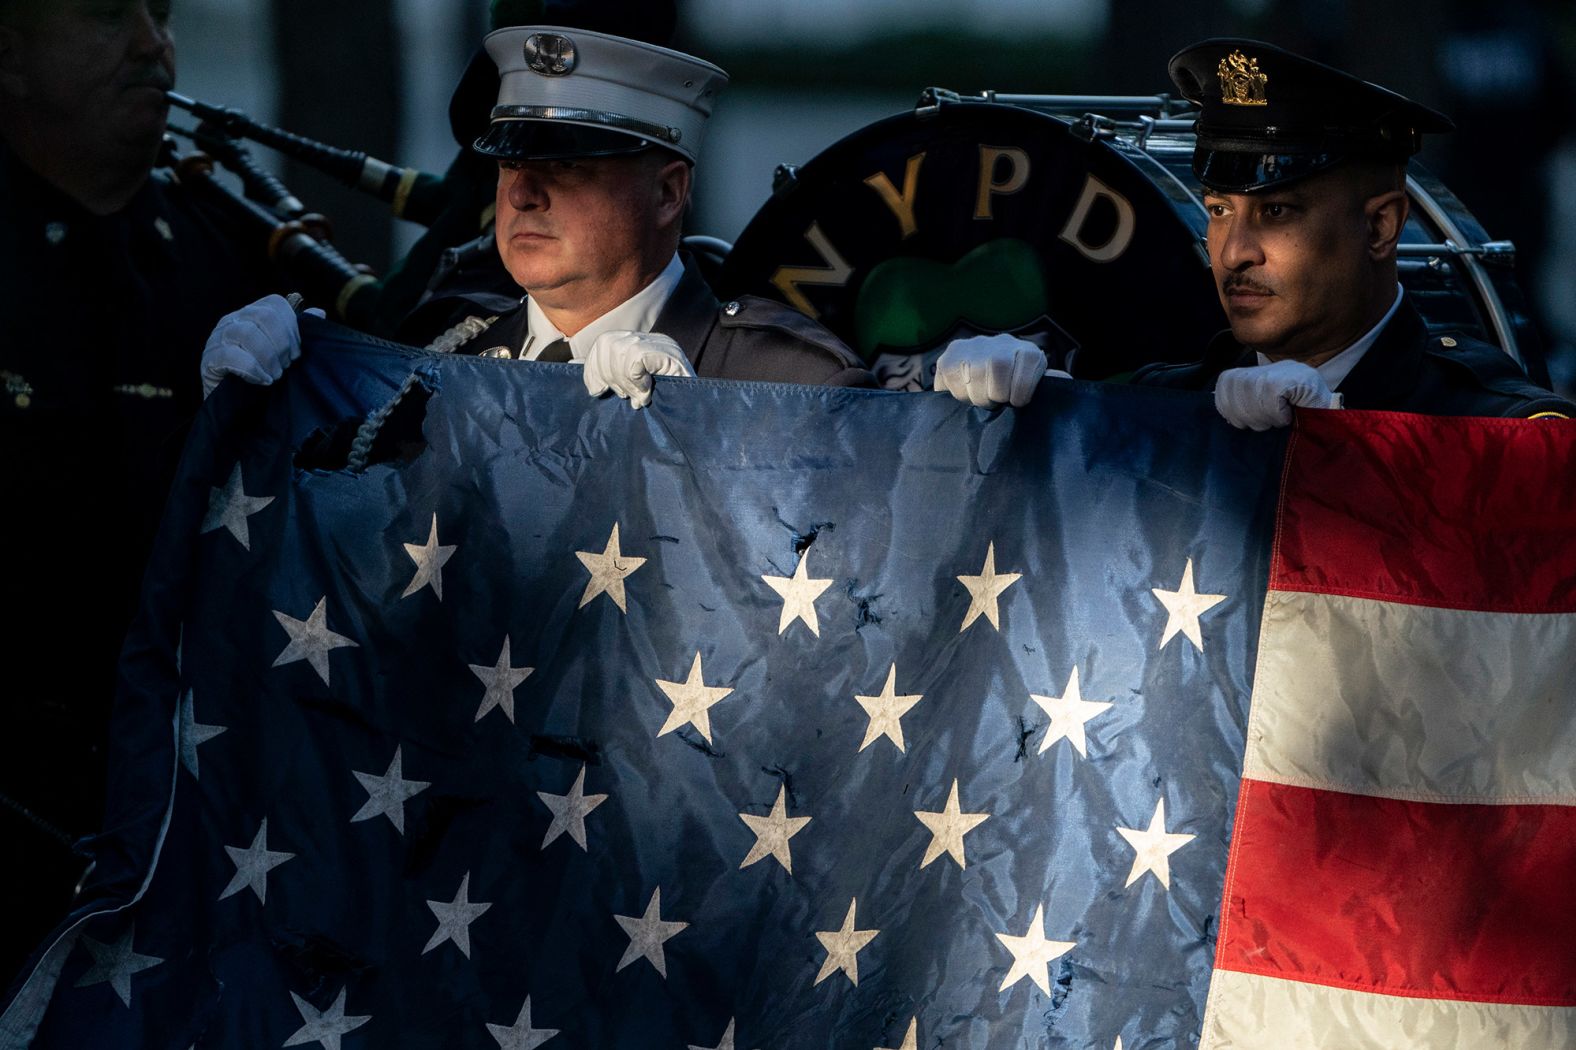 Flag bearers rehearse before the ceremony in New York on Saturday.